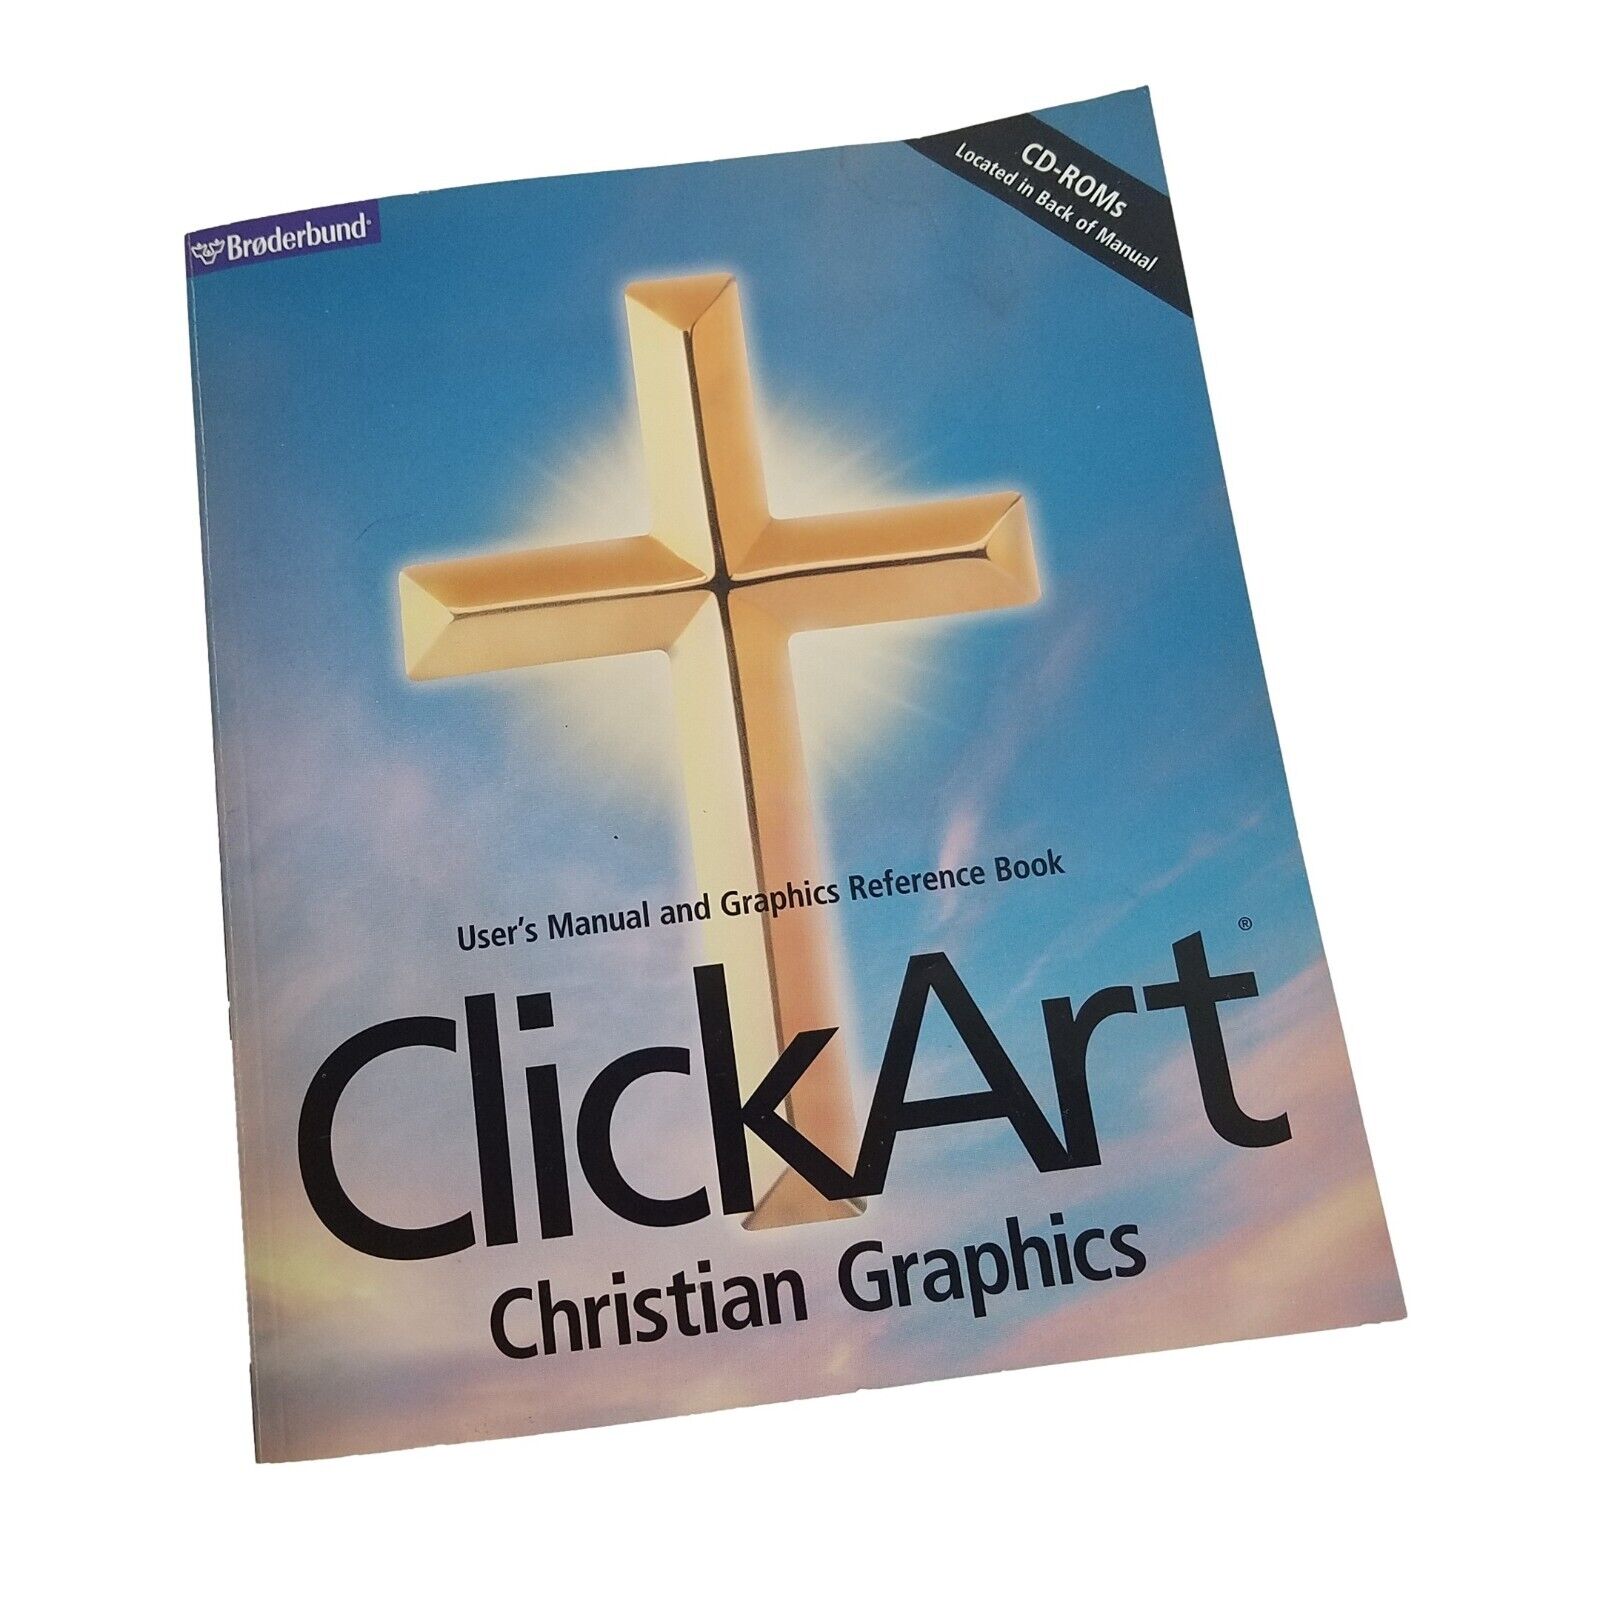 ClickArt Christian Graphics with Manual, Visual Index & CDs